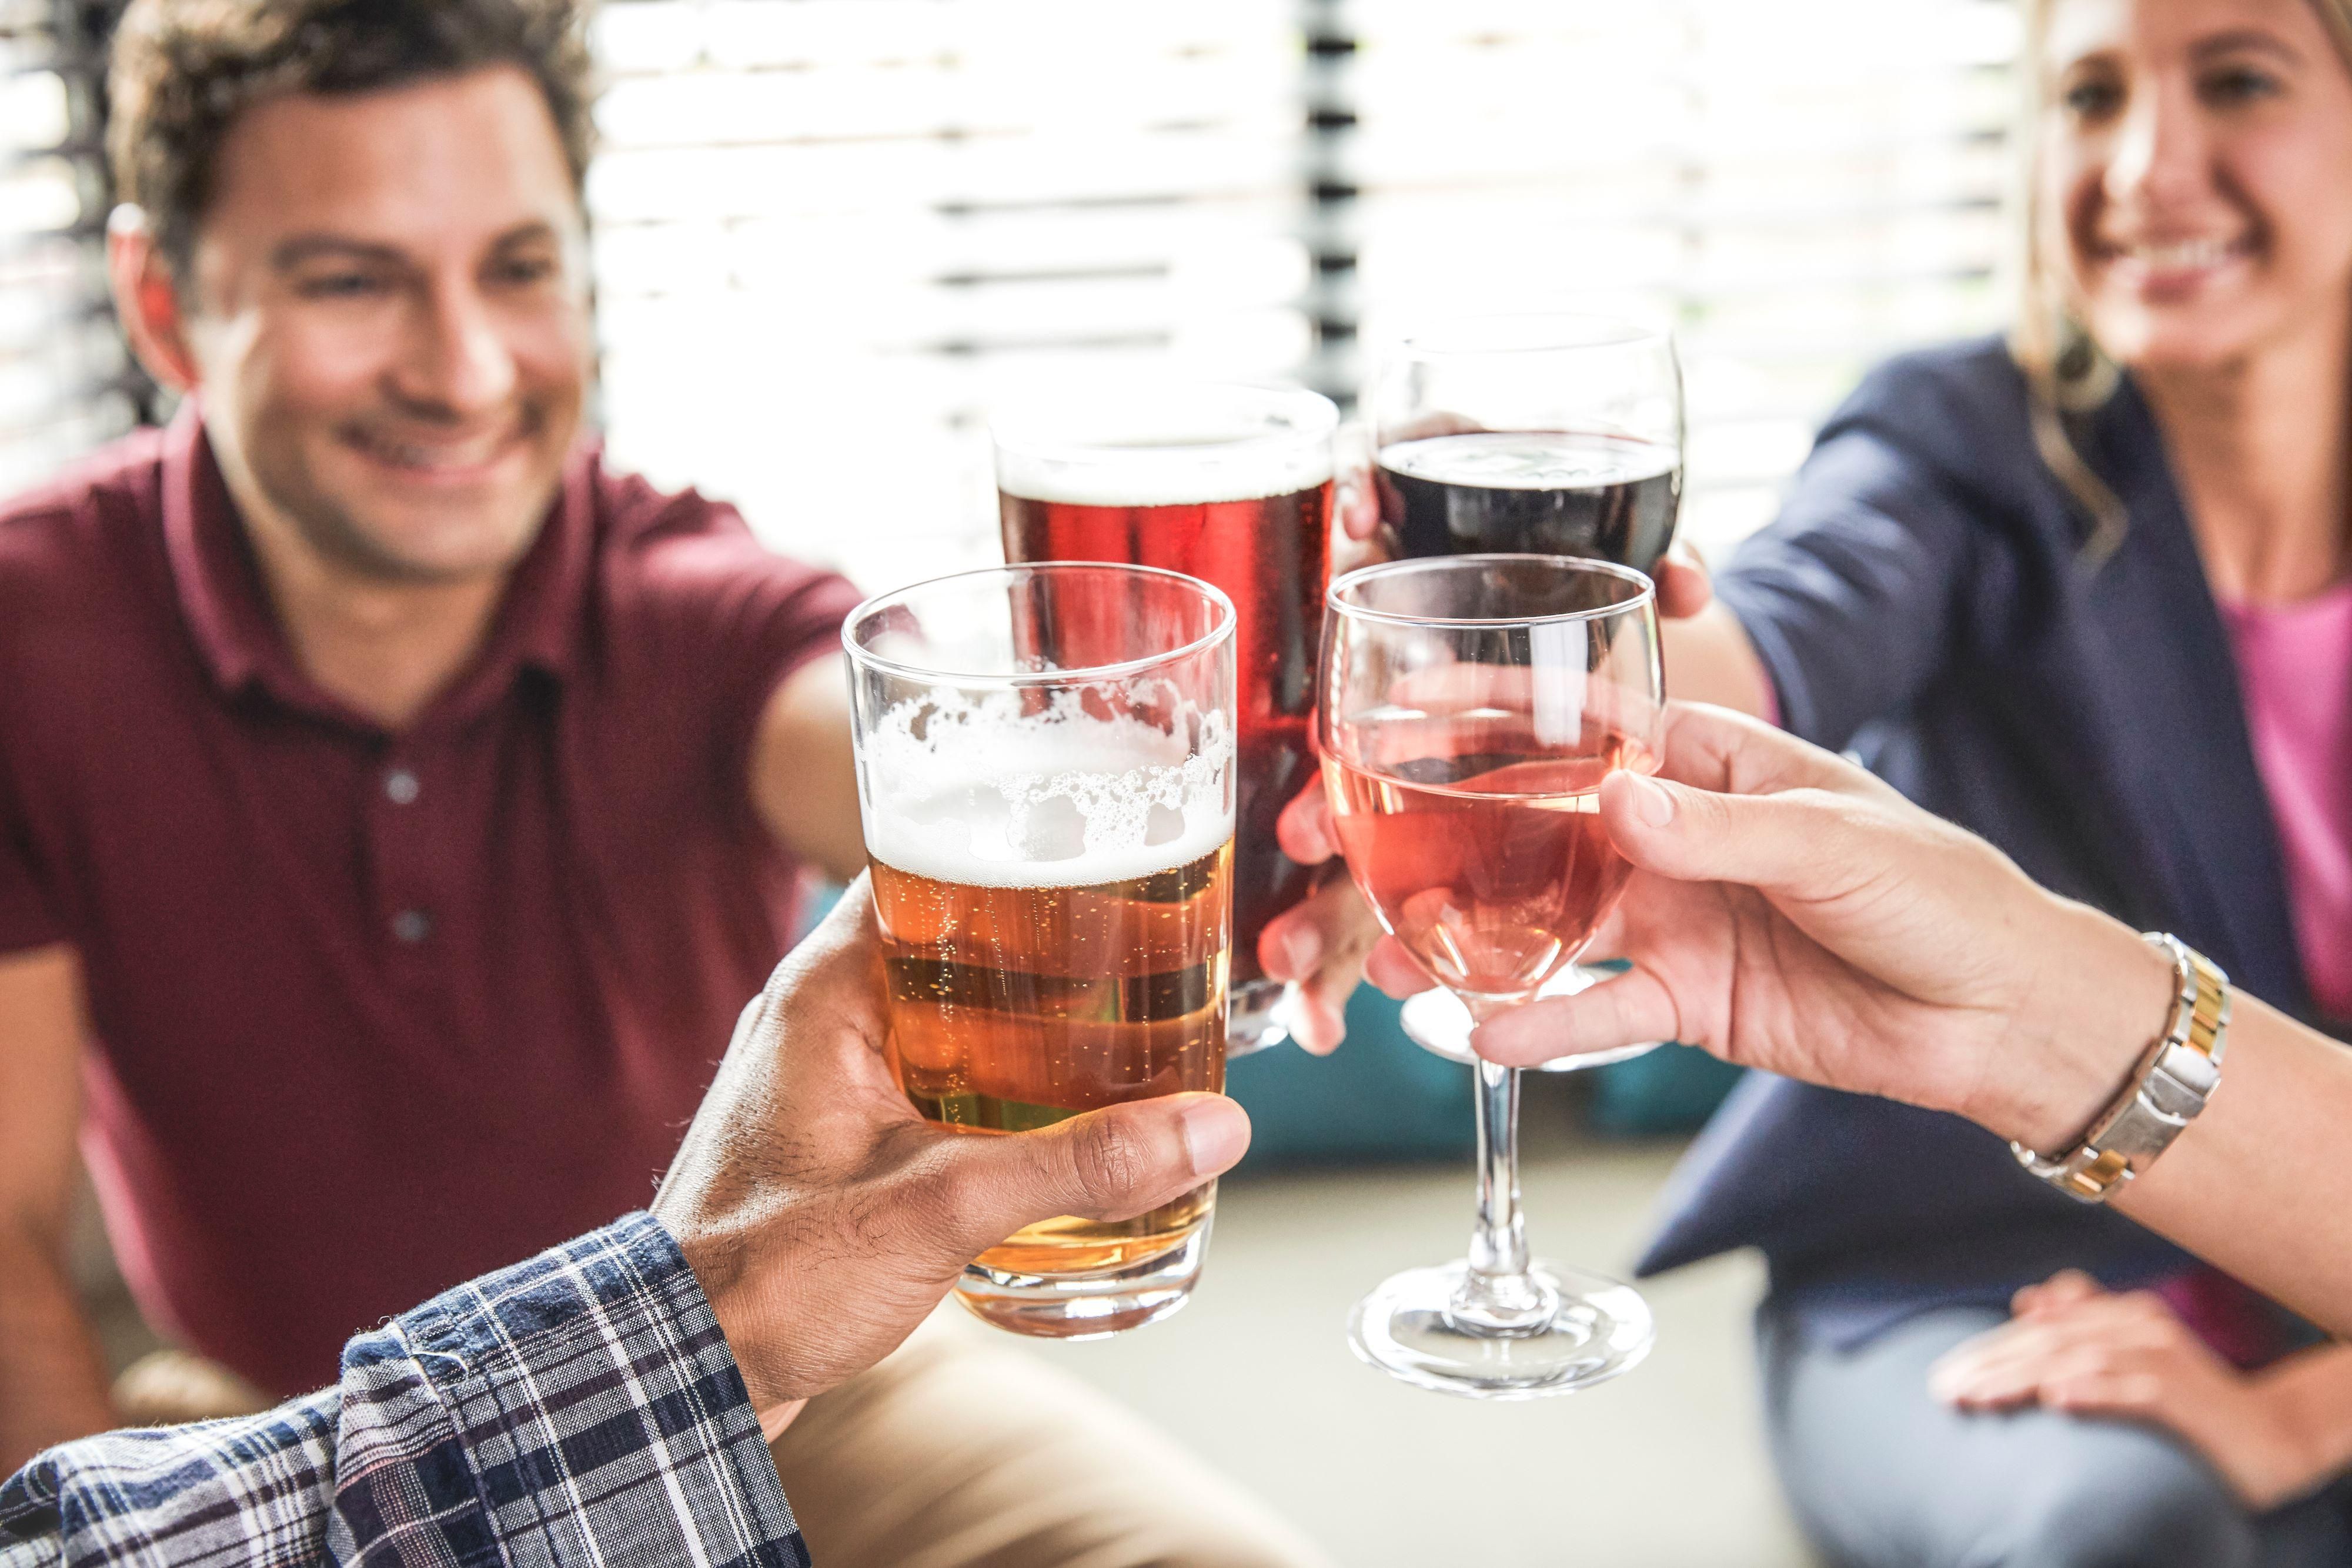 Enjoy delicious free hot appetizers and drinks at our complimentary evening receptions Monday through Wednesday. Relax in the lobby or at the fire pit as you make new friends. Feel a sense of community at the Staybridge Suites® Mt. Juliet Nashville Area.